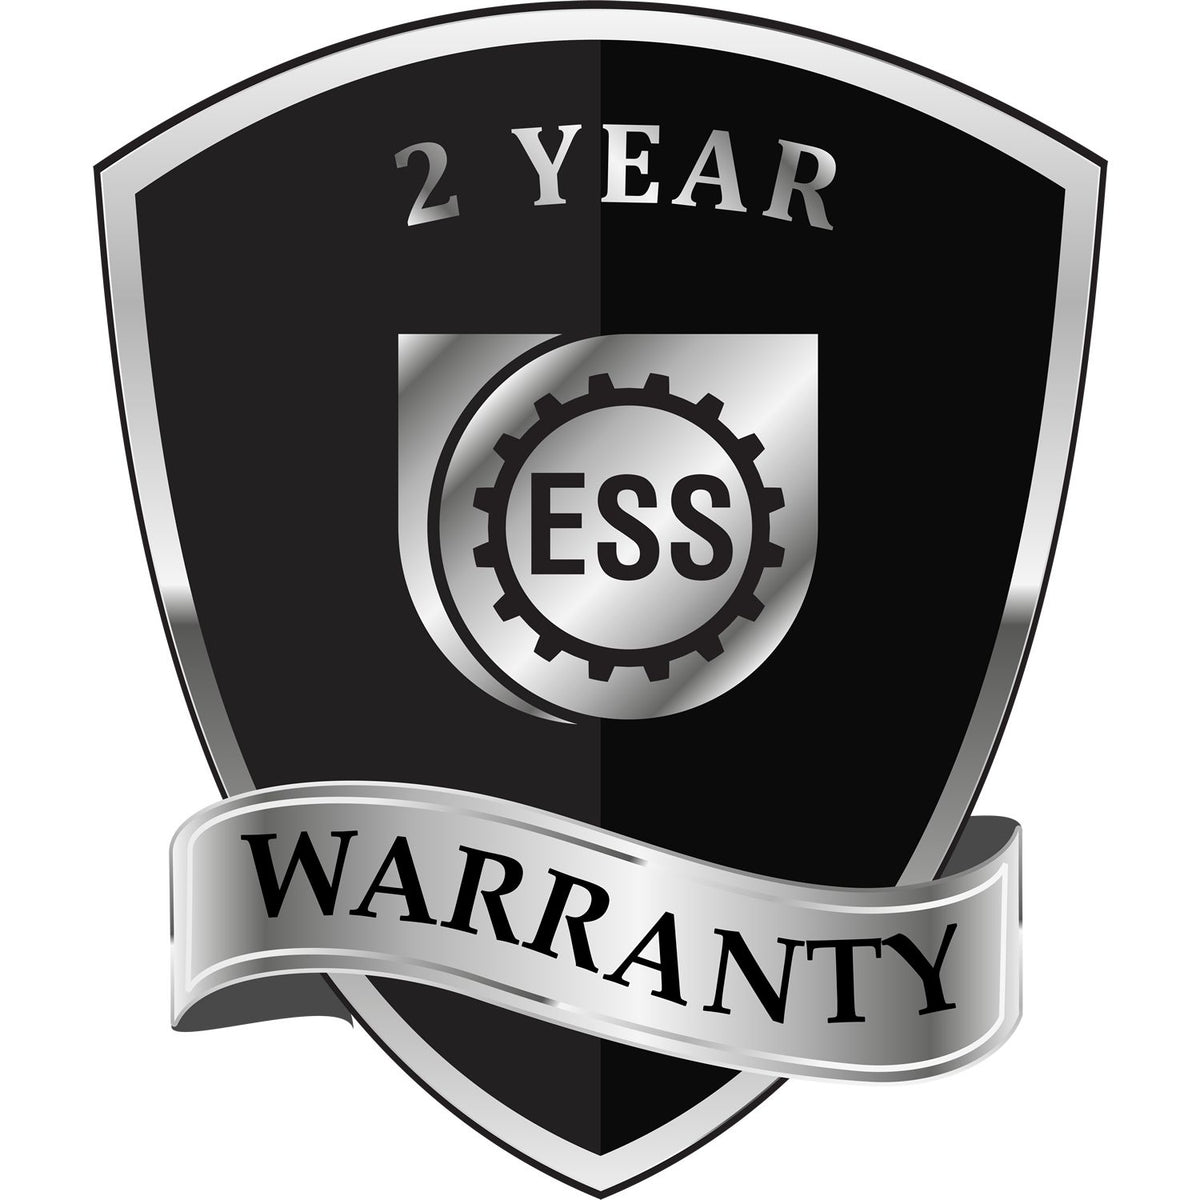 A black and silver badge or emblem showing warranty information for the Heavy Duty Cast Iron Montana Geologist Seal Embosser